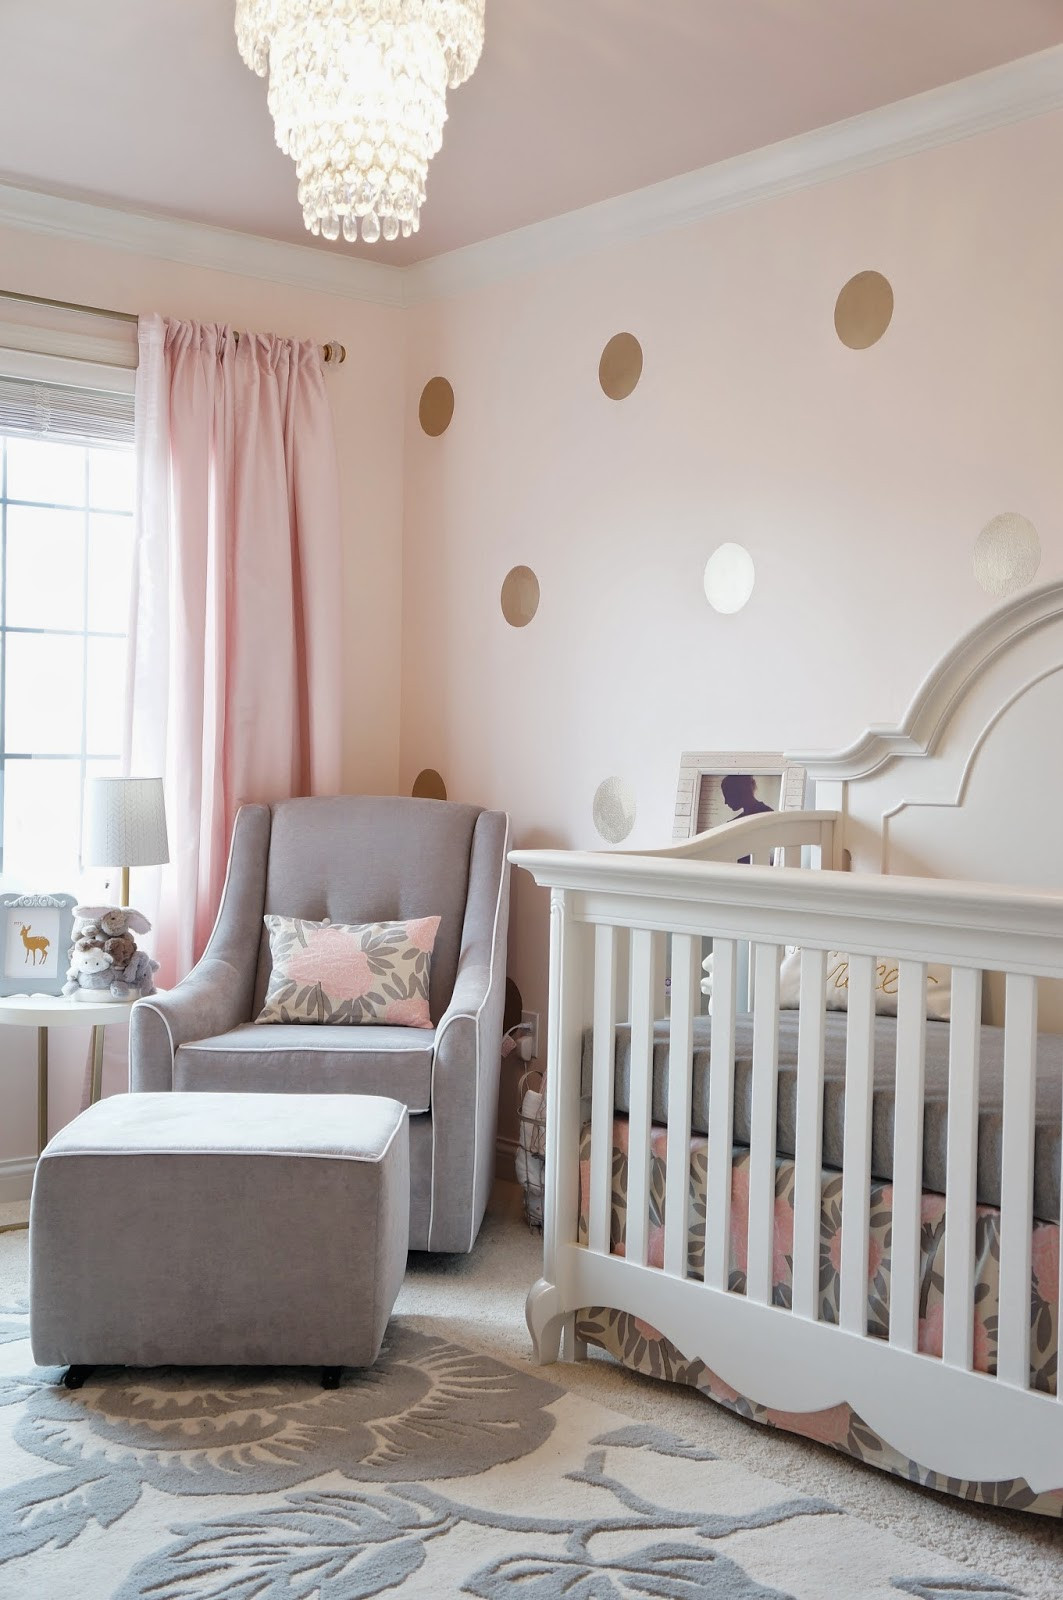 Decoration For Baby Girl Room
 It s a pretty Prins life Nursery Reveal